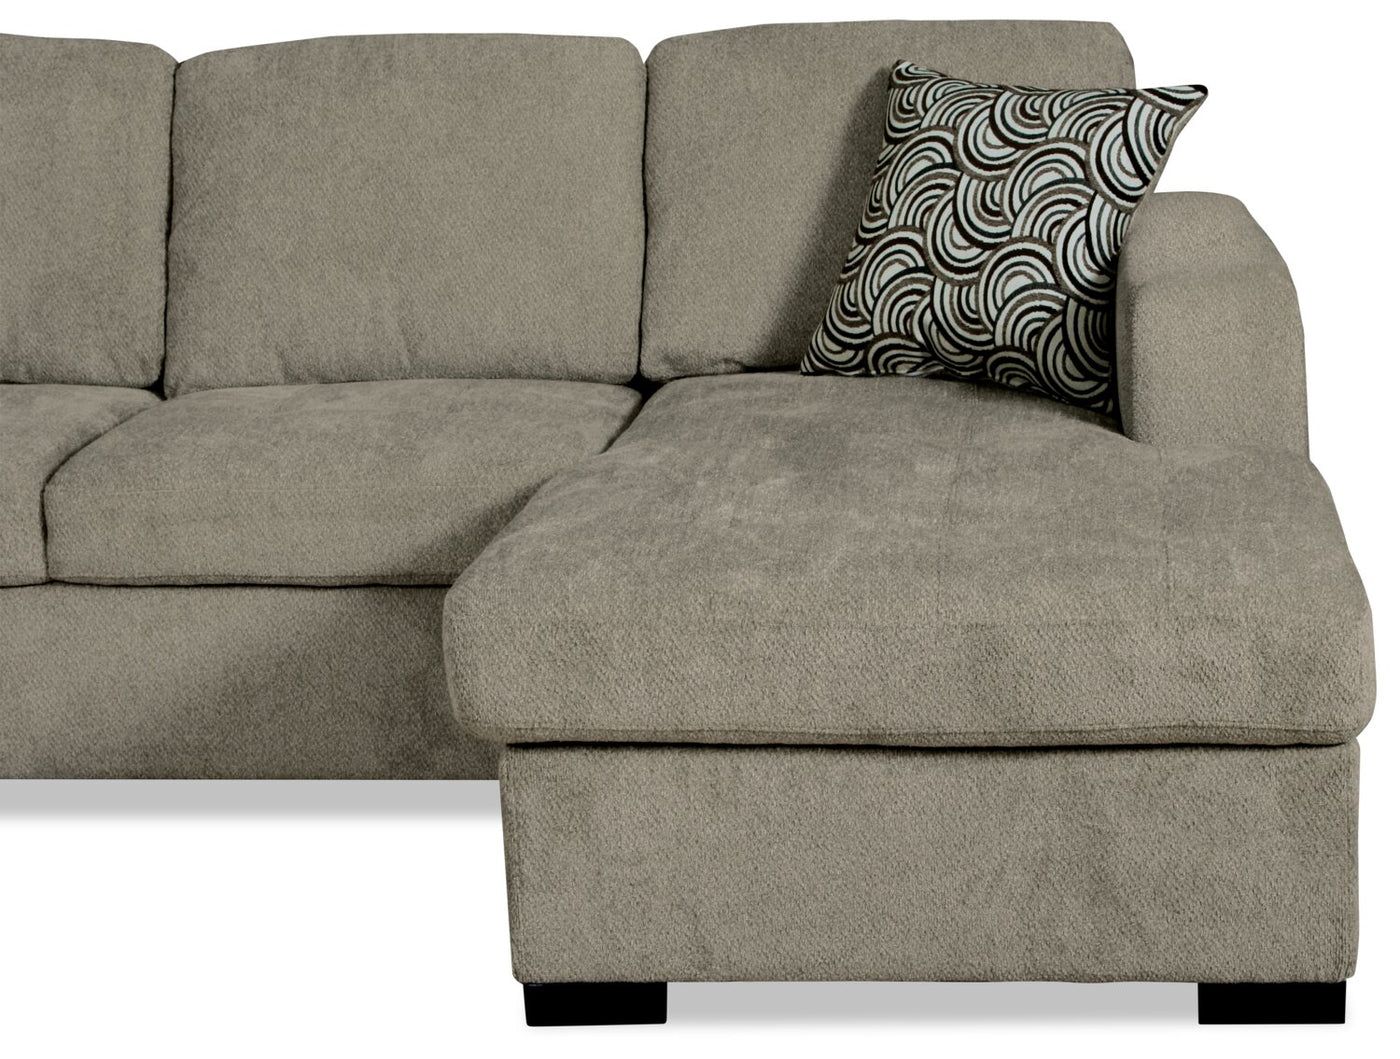 Izzy 4 Piece Chenille Sleeper Sectional With Right Facing Storage C In Chenille Sectional Sofas (View 4 of 20)